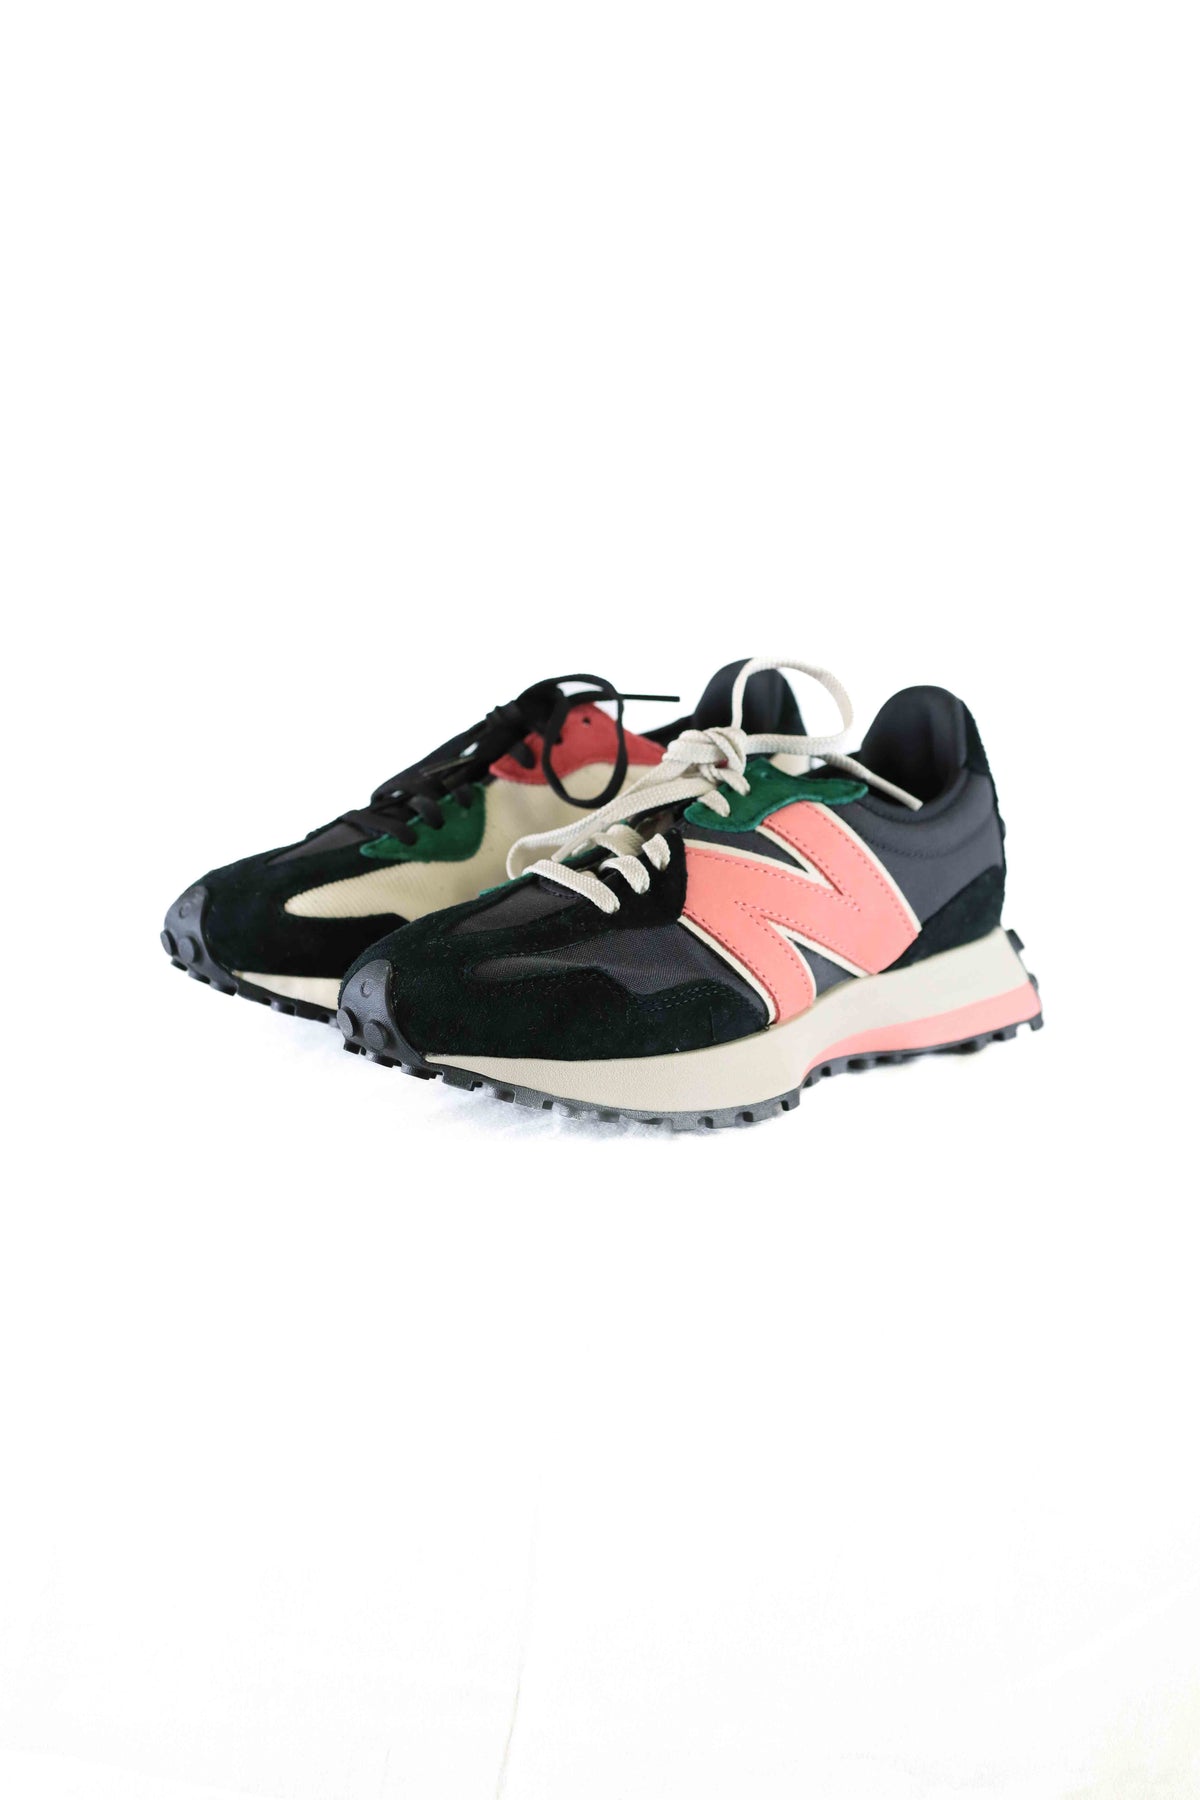 New Balance Black And Pink Sneakers 327 39.5